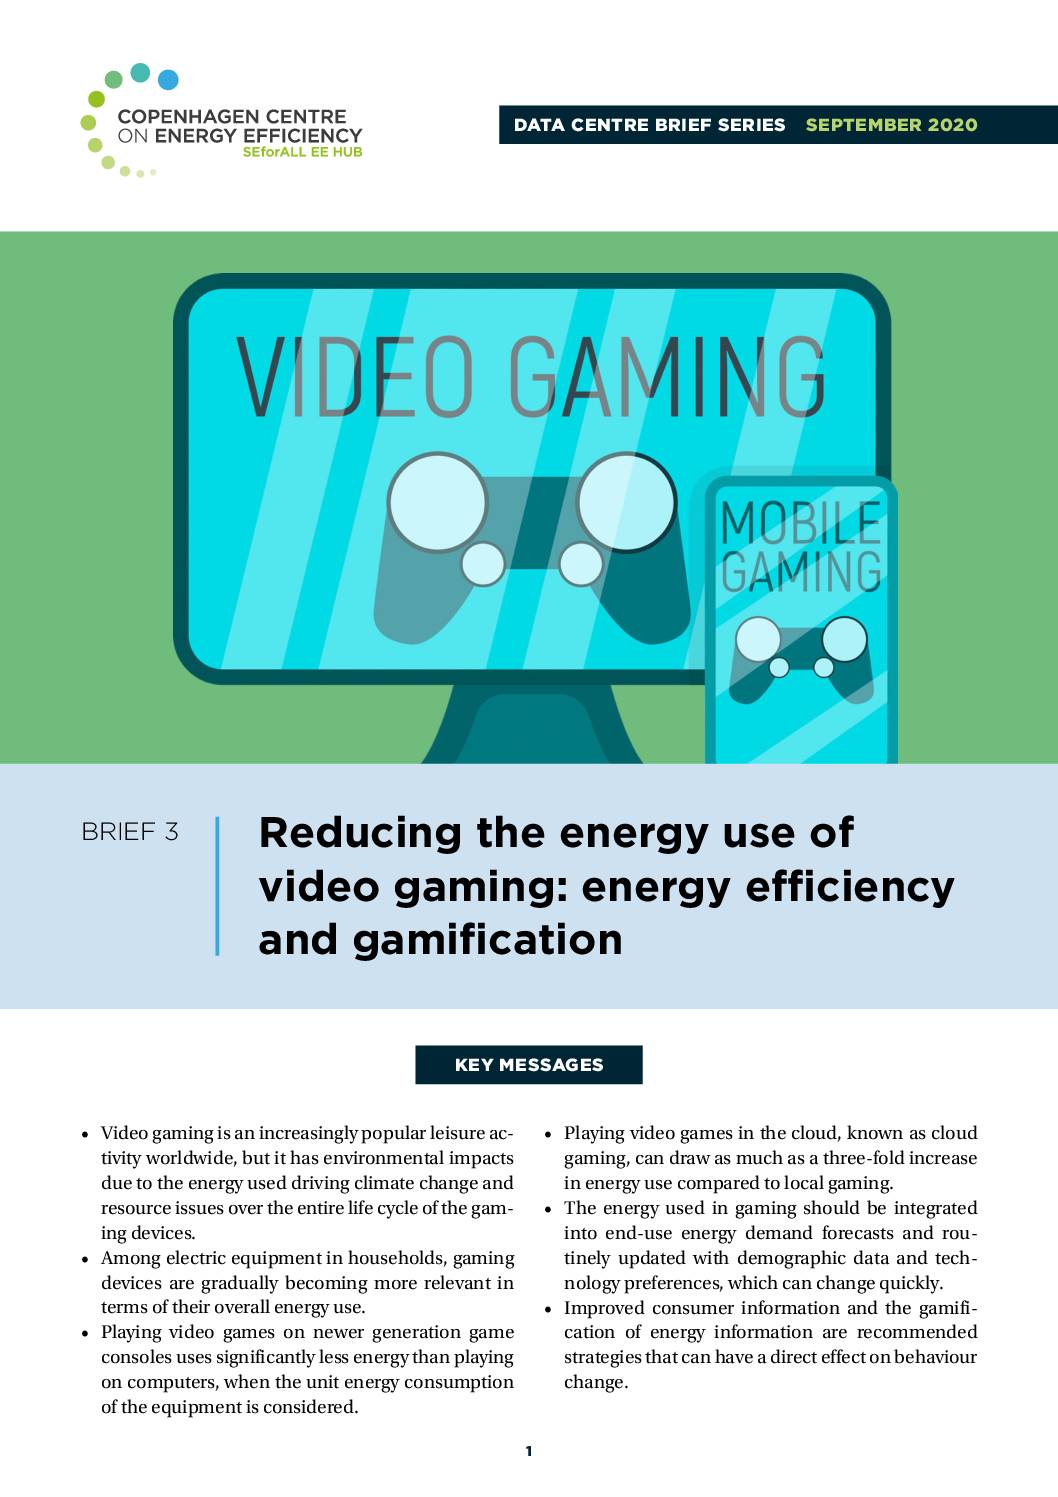 Reducing the energy use of video gaming: energy efficiency and gamification